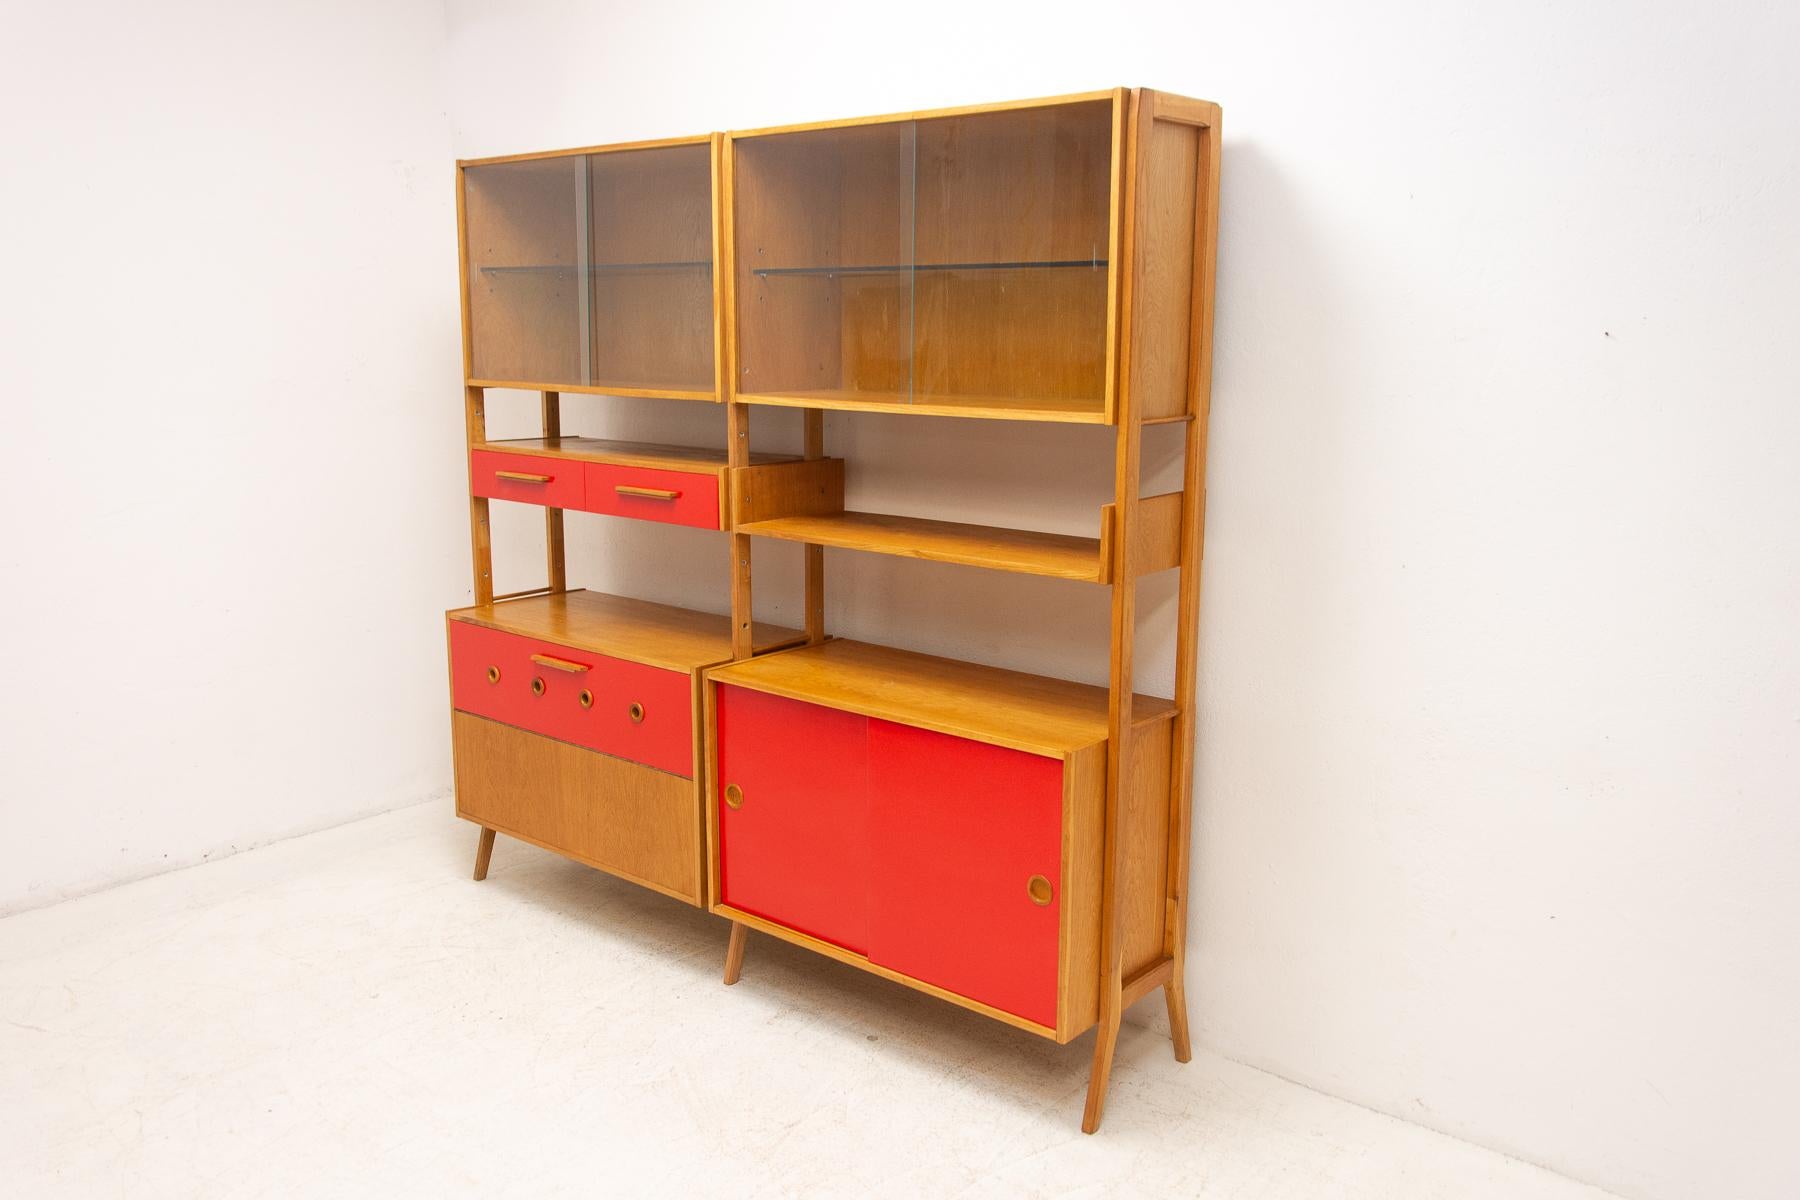 Mid century wall shelf system from the 1960´s. It was designed by František Jirák and was made by Tatra nábytok company in the former Czechoslovakia. It was renovated, in very good condition. Beech wood veneer.

 

Measures: Height: 189